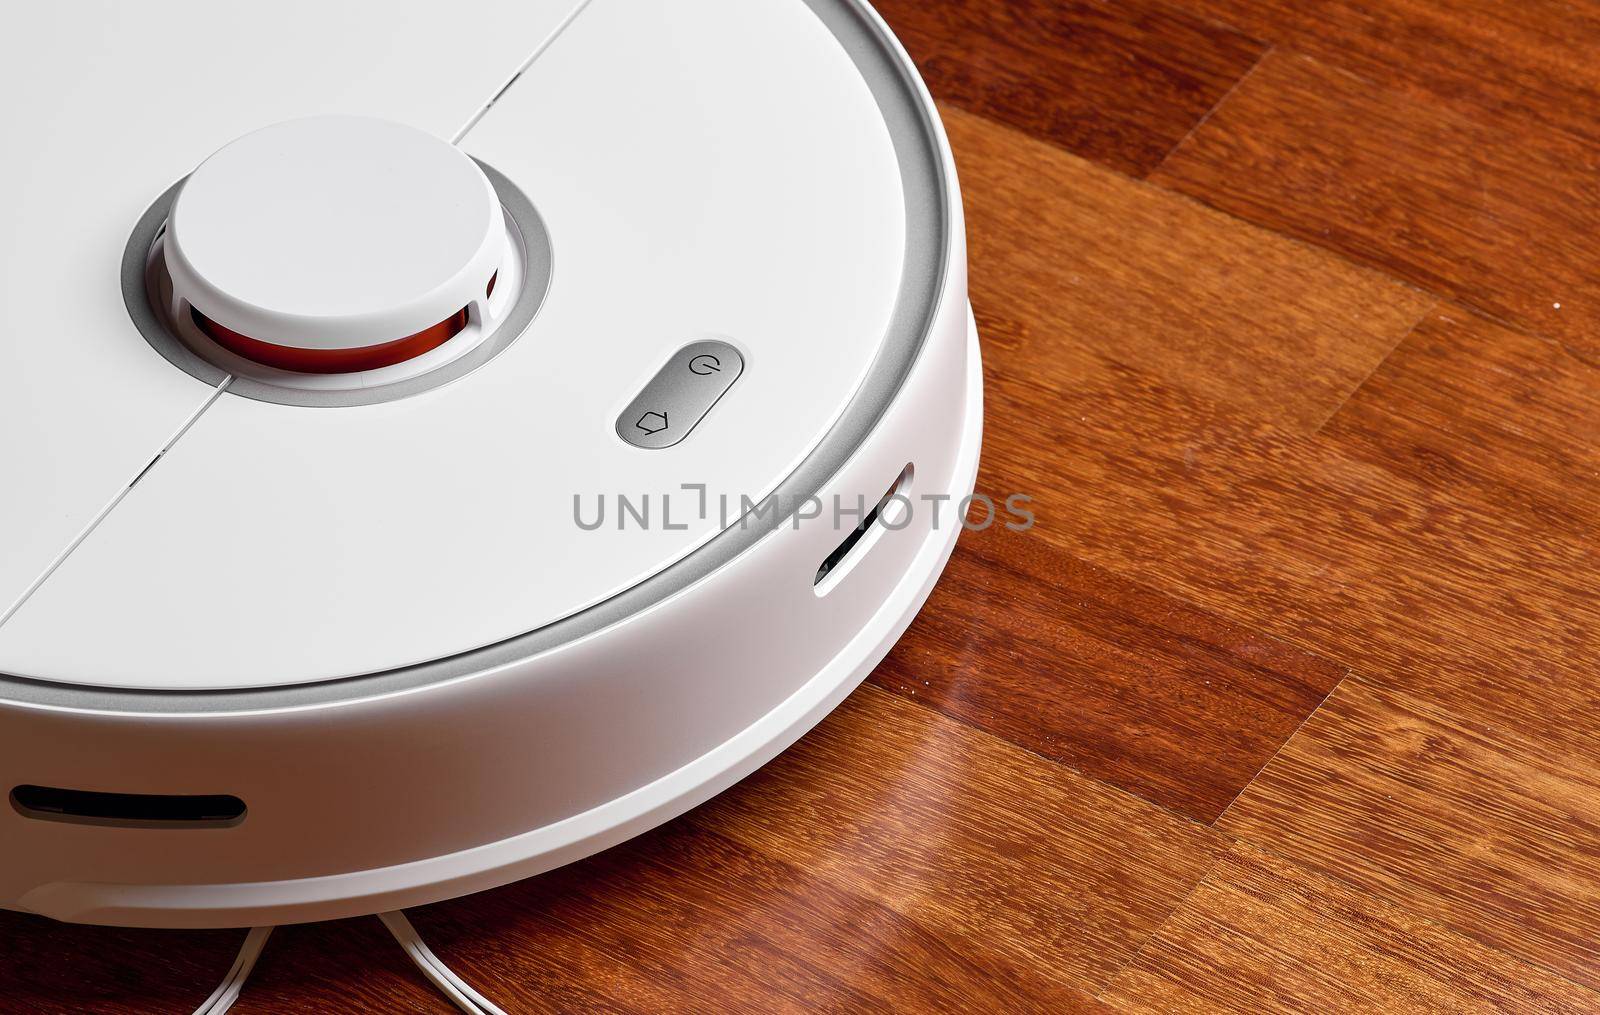 Smart Robot Vacuum Cleaner on wood floor. Robot vacuum cleaner performs automatic cleaning of the apartment at a certain time. Smart home.